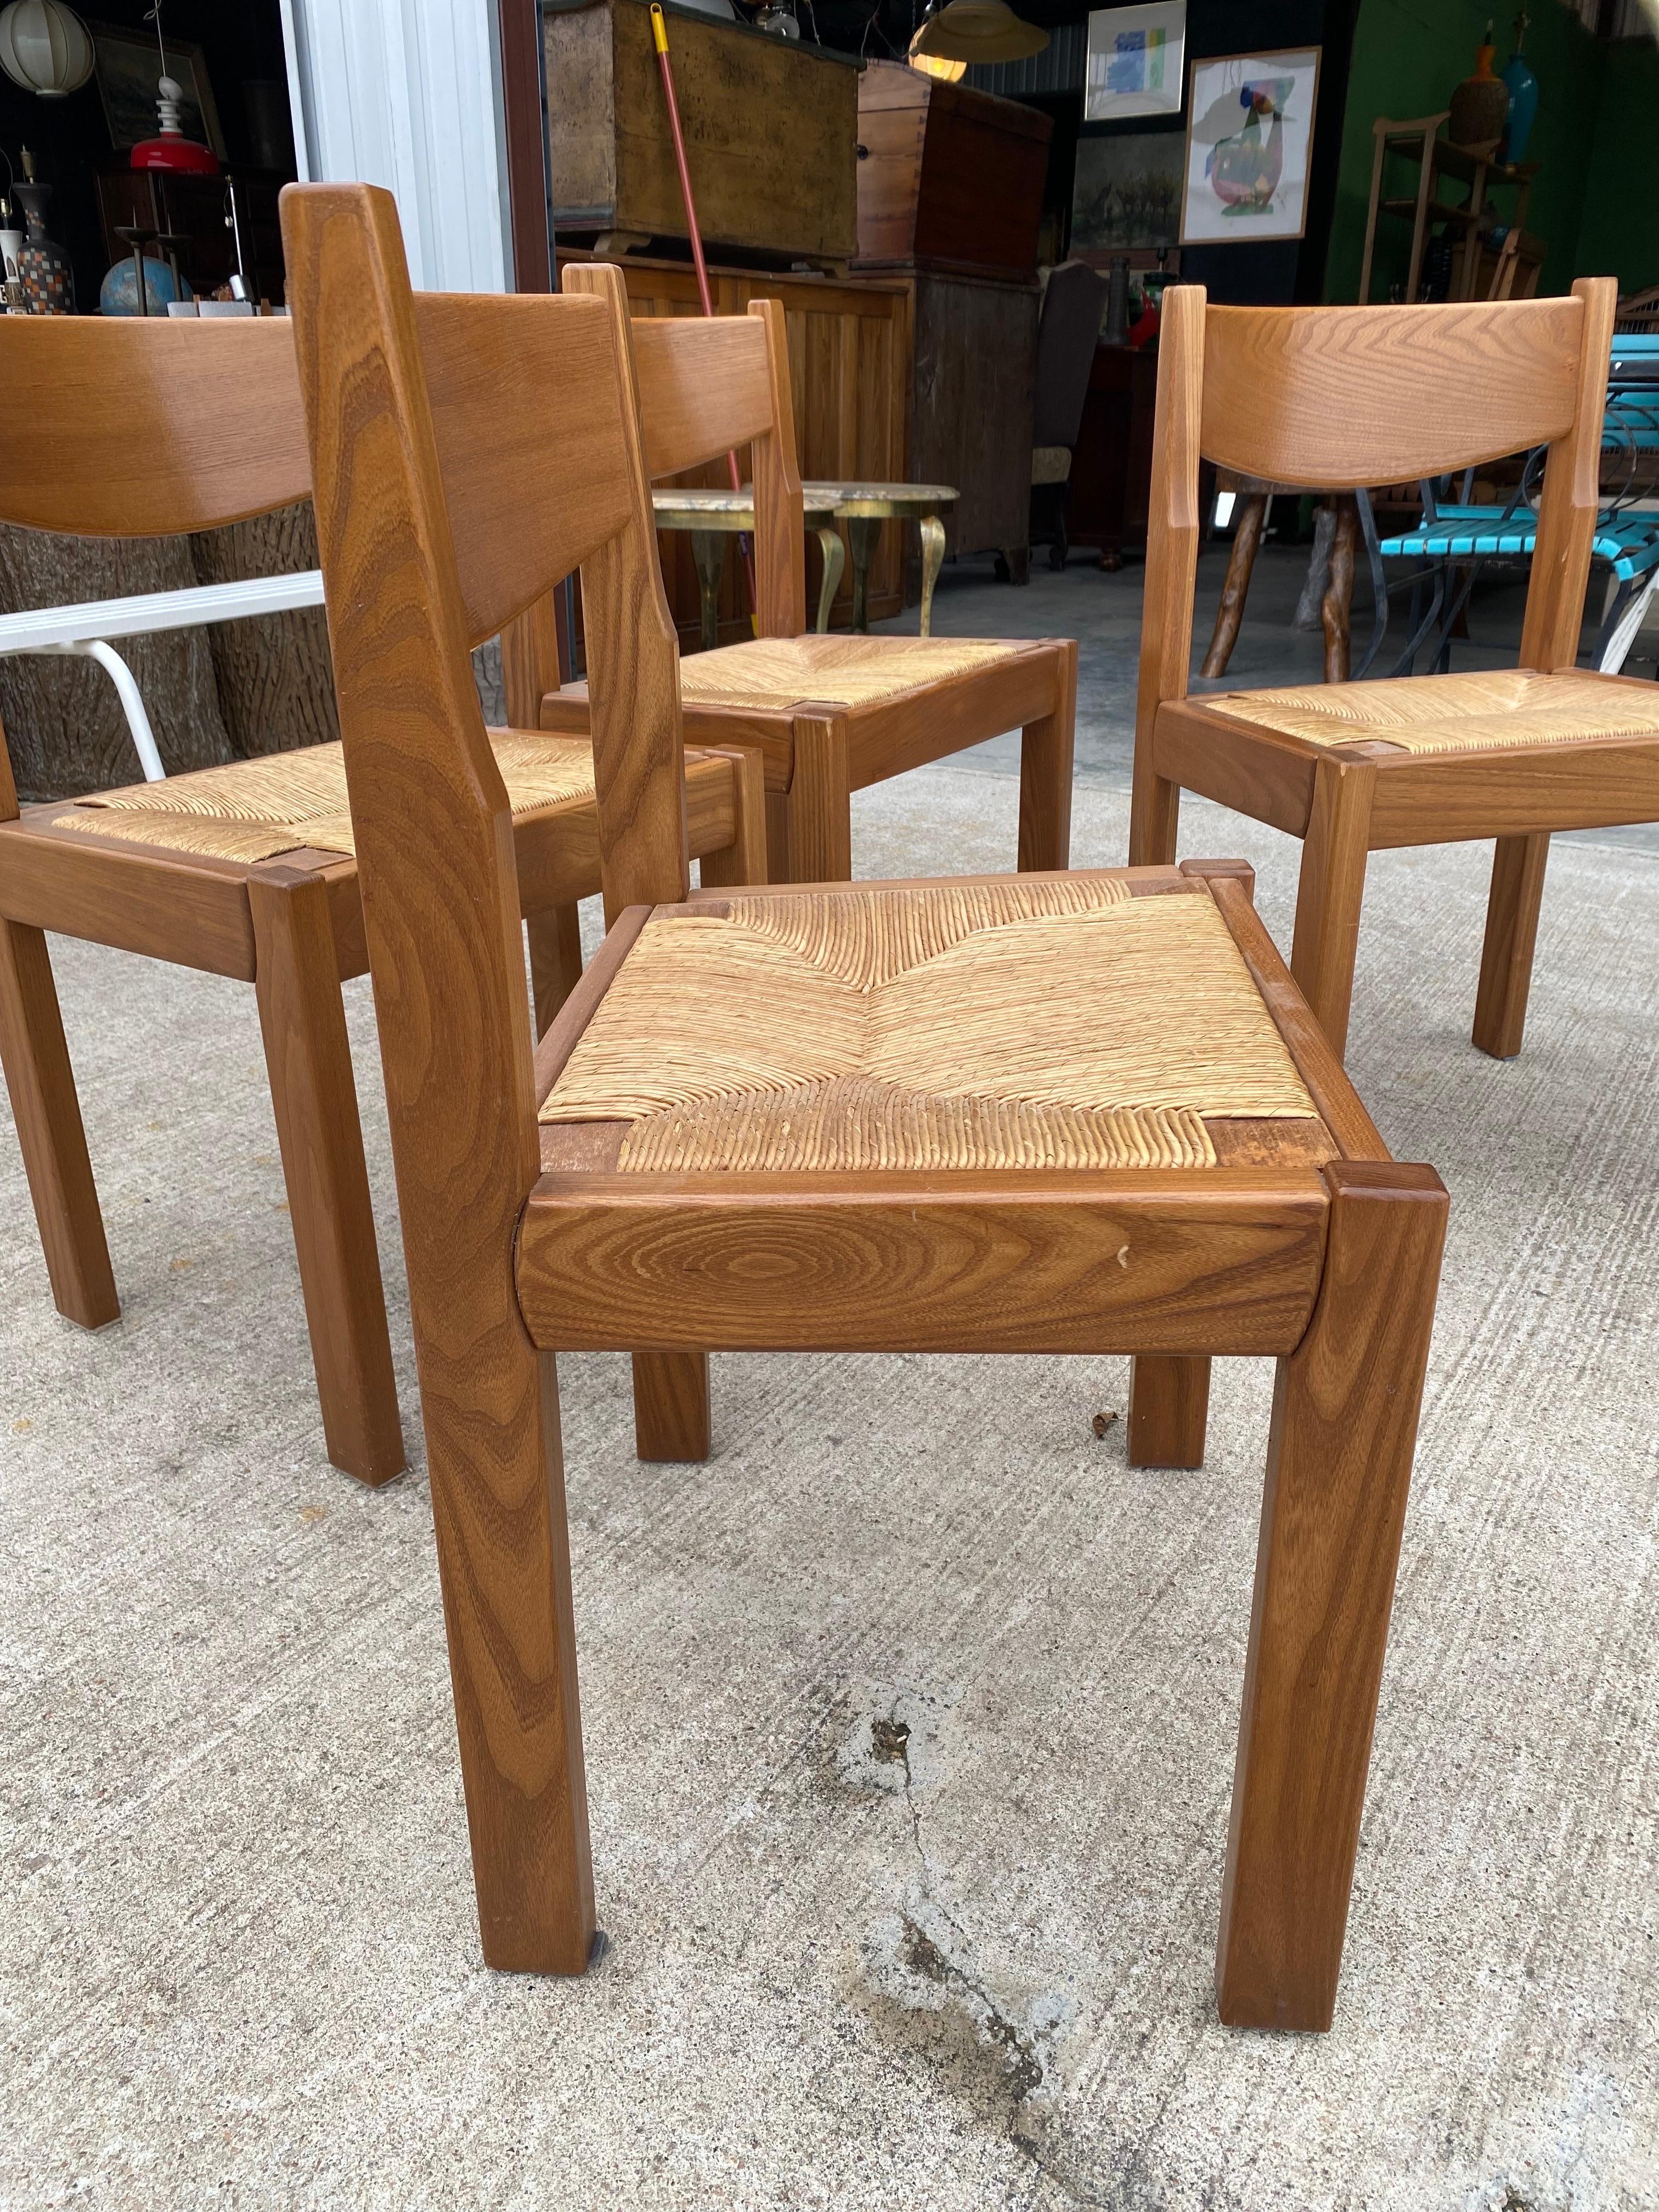 Set of 4 vintage brutalist Maison Regain dining chairs made of solid elm with seagrass seats, circa 1970s, France. Seats come off of the frame for easy shipping. Chairs are sturdy and in good overall condition; rush in great condition. 
Dimensions: